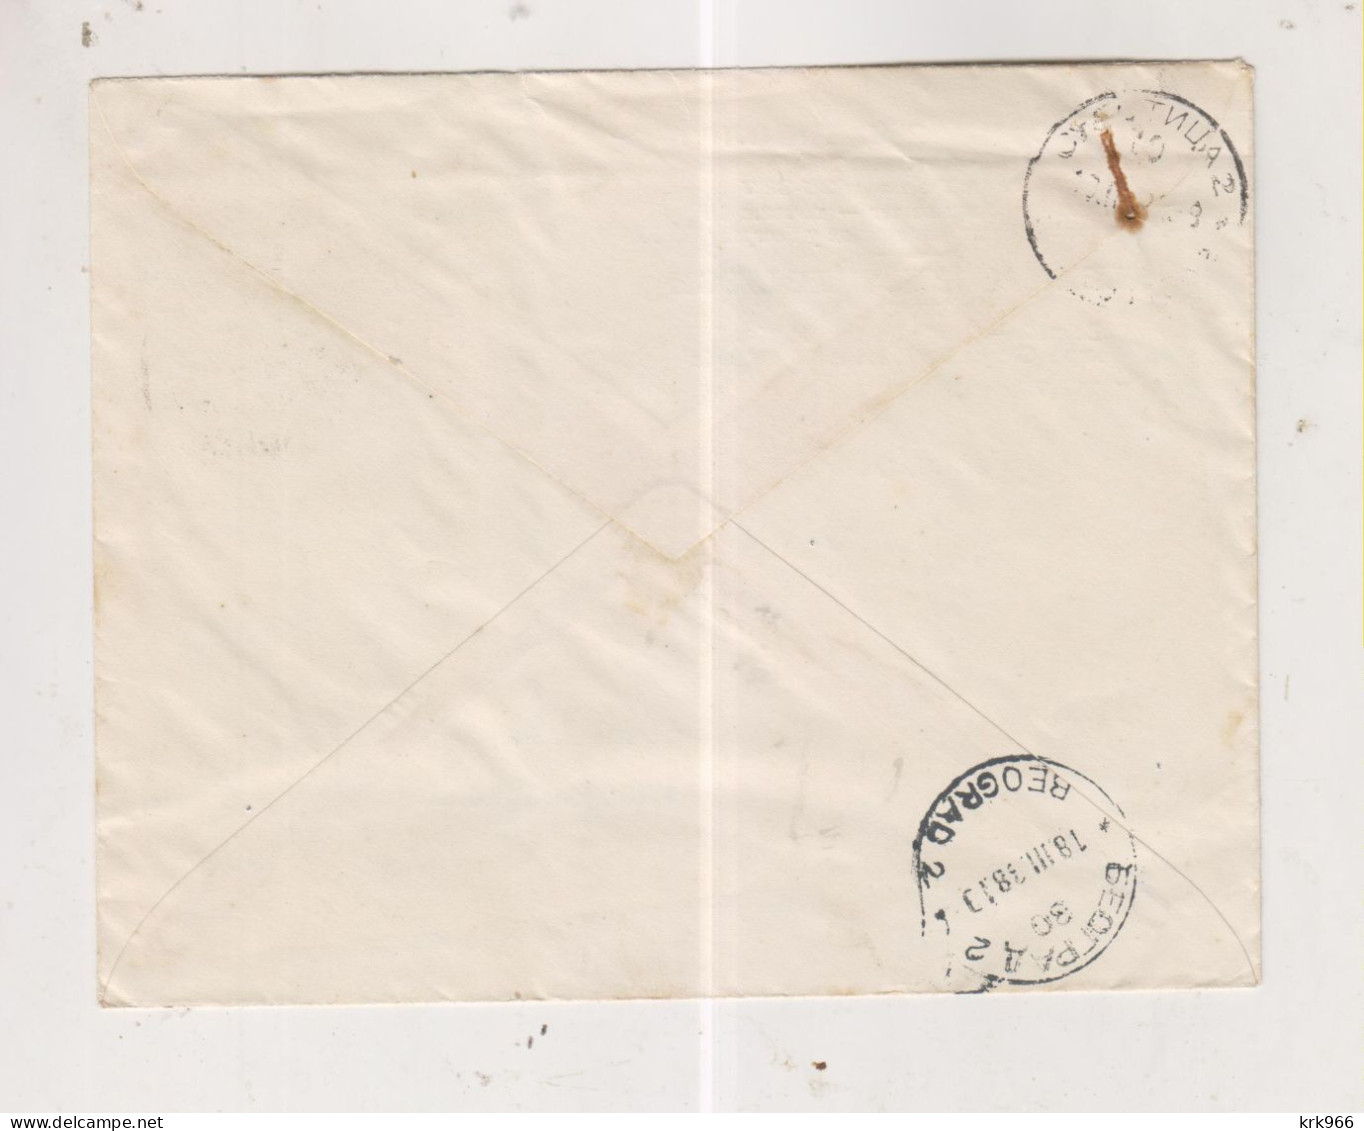 YUGOSLAVIA,1938 BEOGRAD Registered Cover To Subotica Returned - Covers & Documents